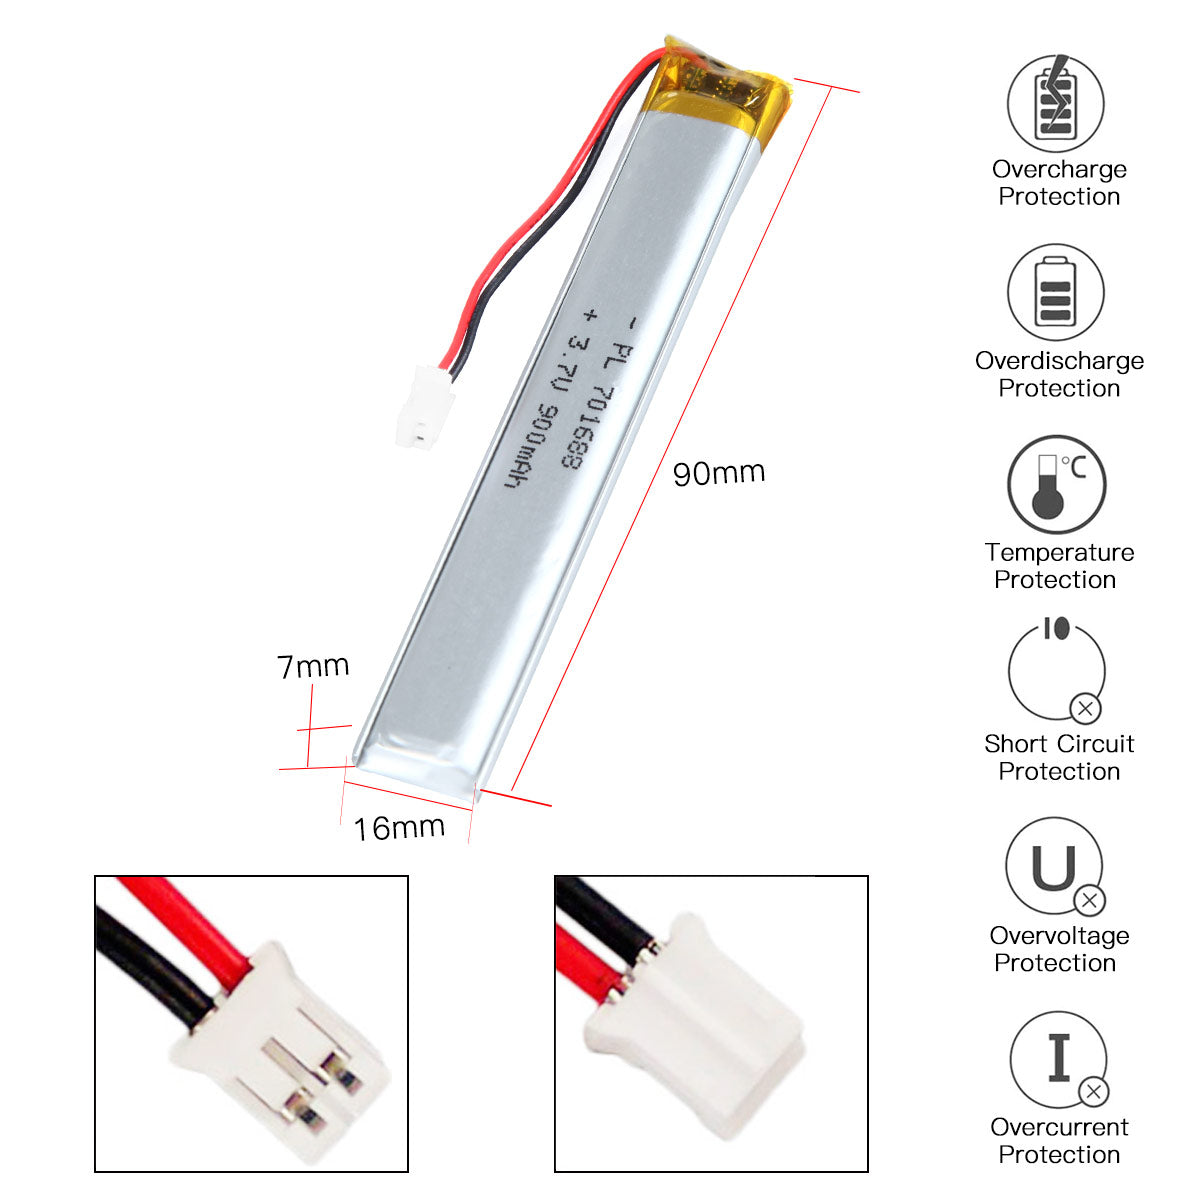 YDL 3.7V 900mAh 701688 Rechargeable Lithium Polymer Battery